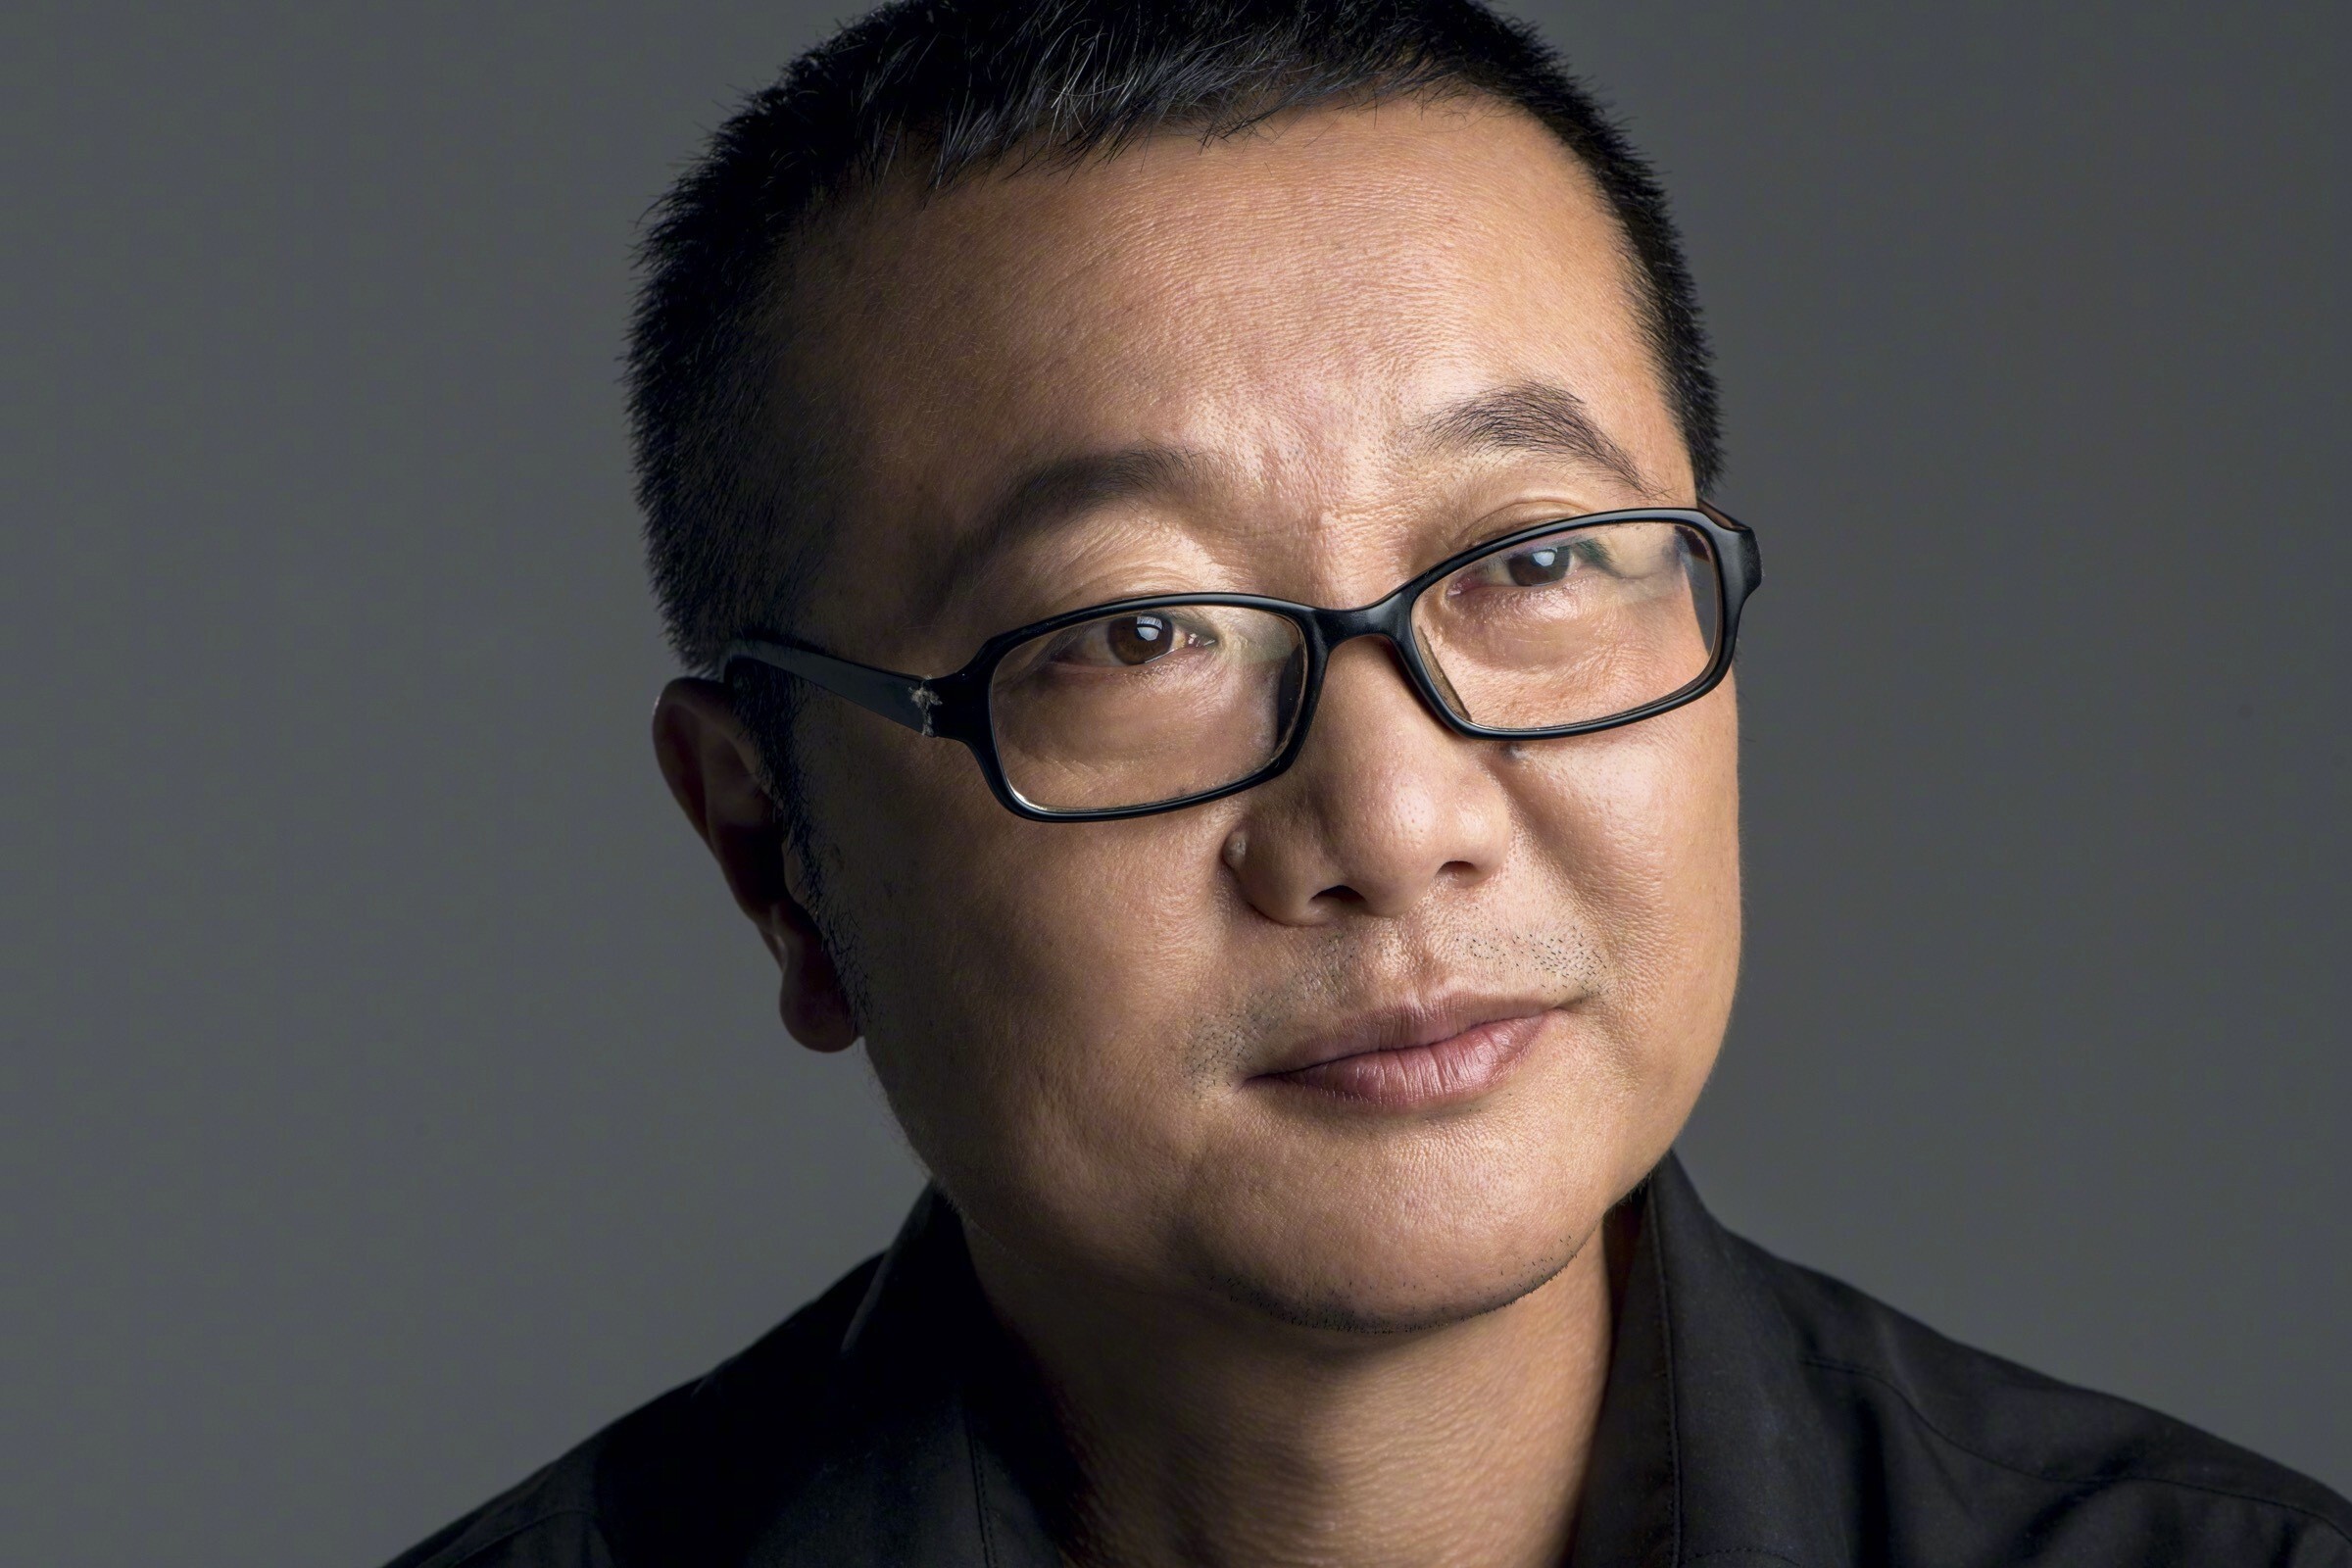 Liu Cixin, author of The Wandering Earth and The Three-Body Problem. Photo: Handout